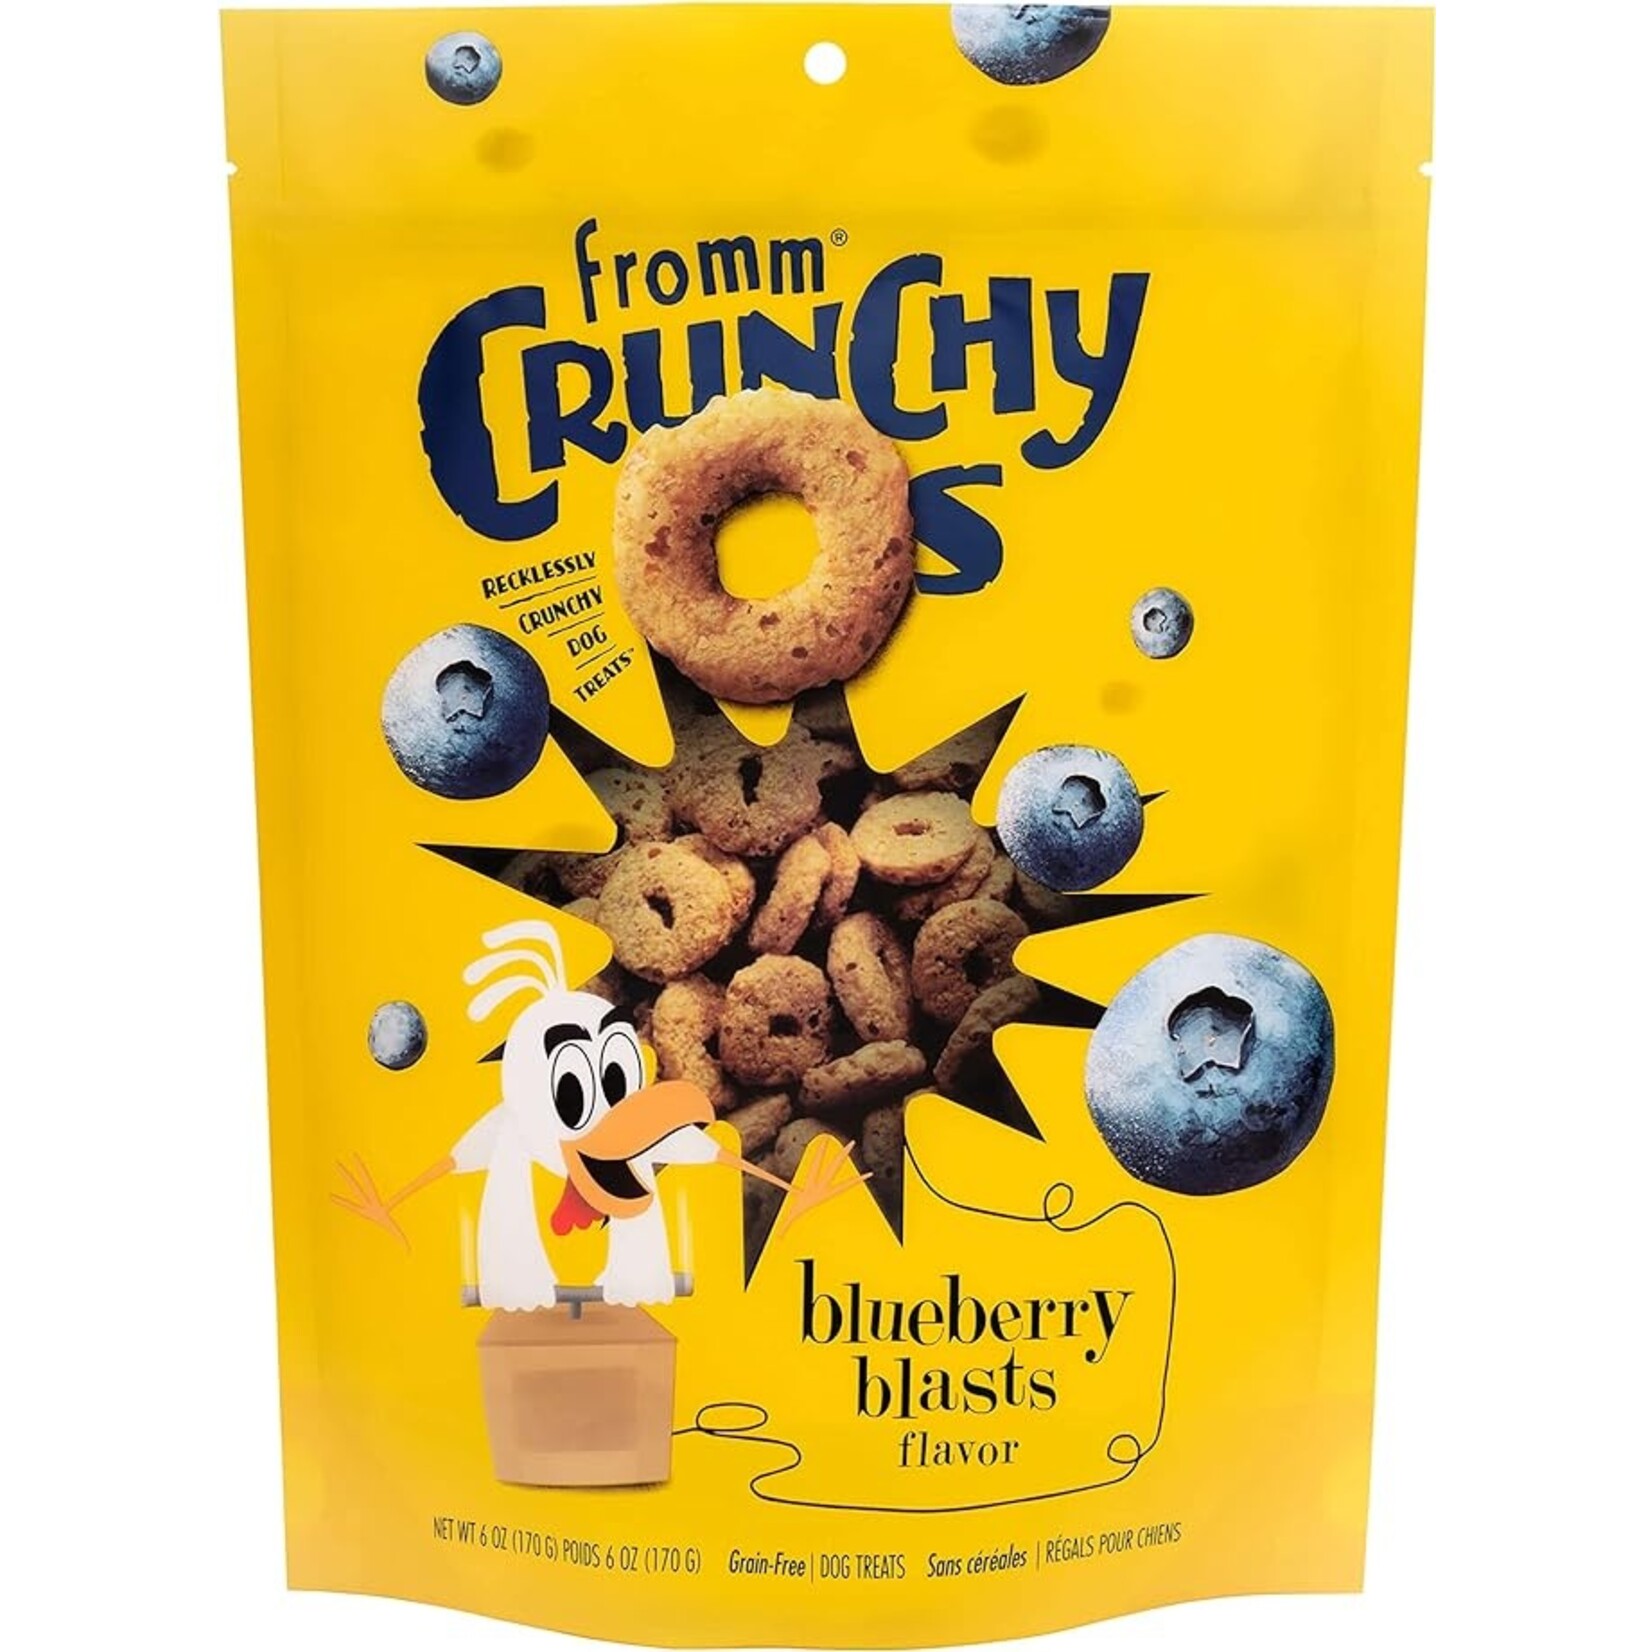 Fromm Fromm Crunchy O'S Blueberry Blasts  6oz